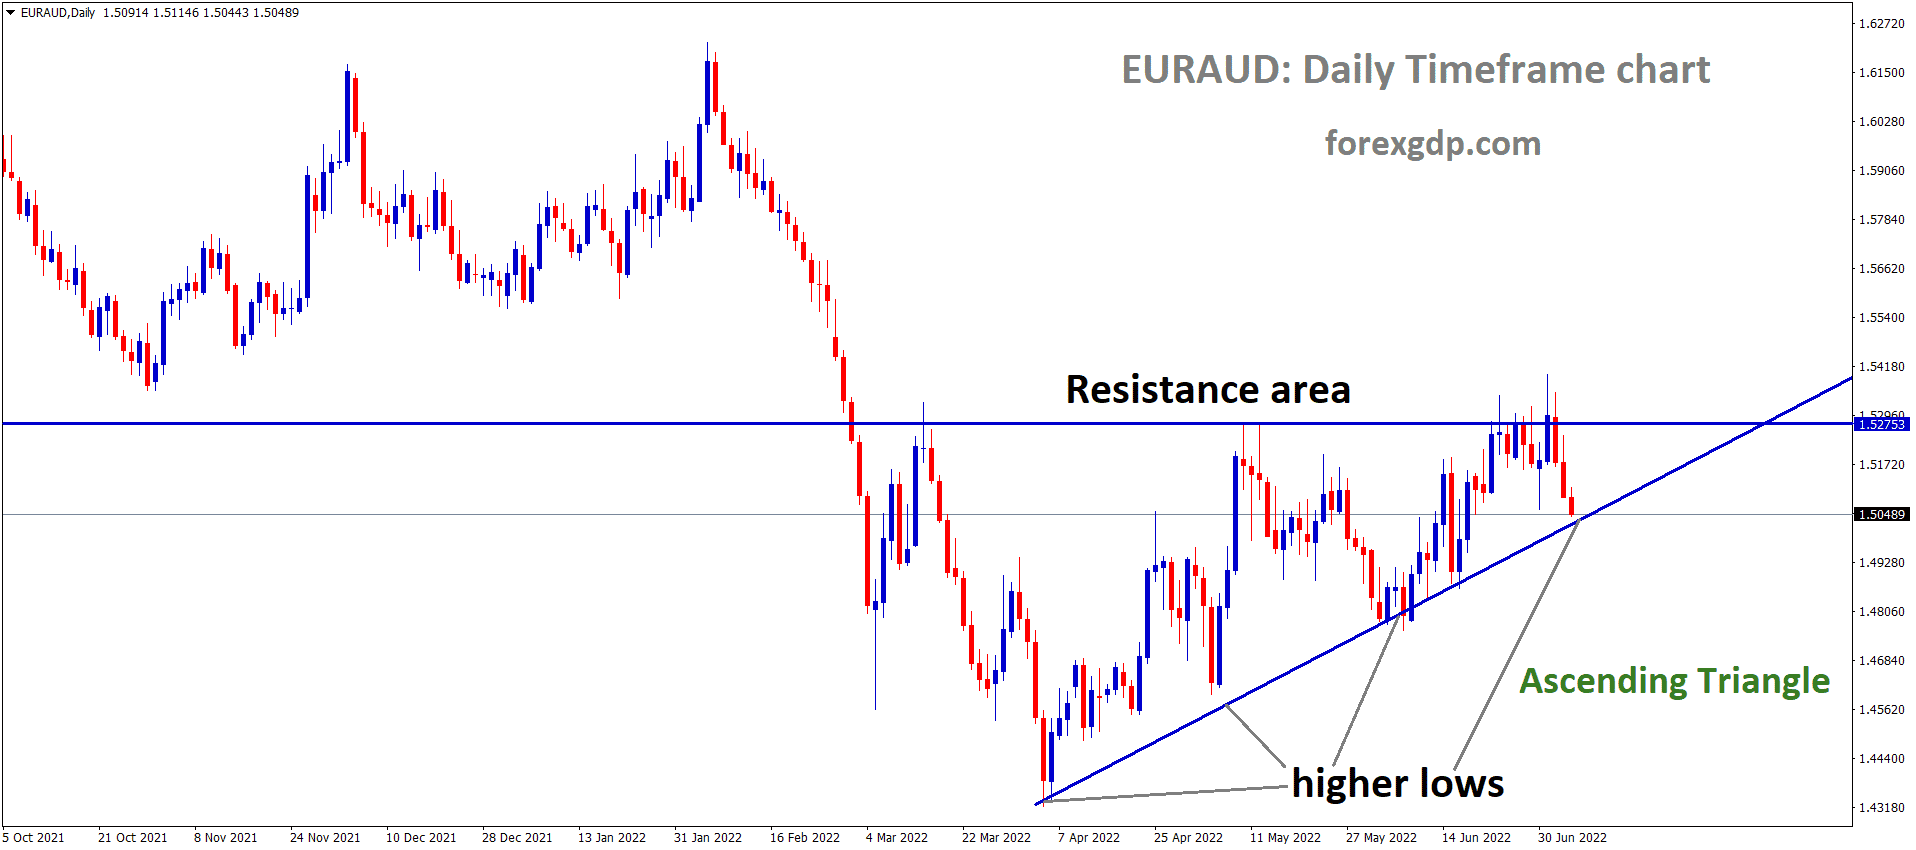 EURAUD is moving in an Ascending triangle pattern and the Market has reached the higher low area of the triangle pattern.